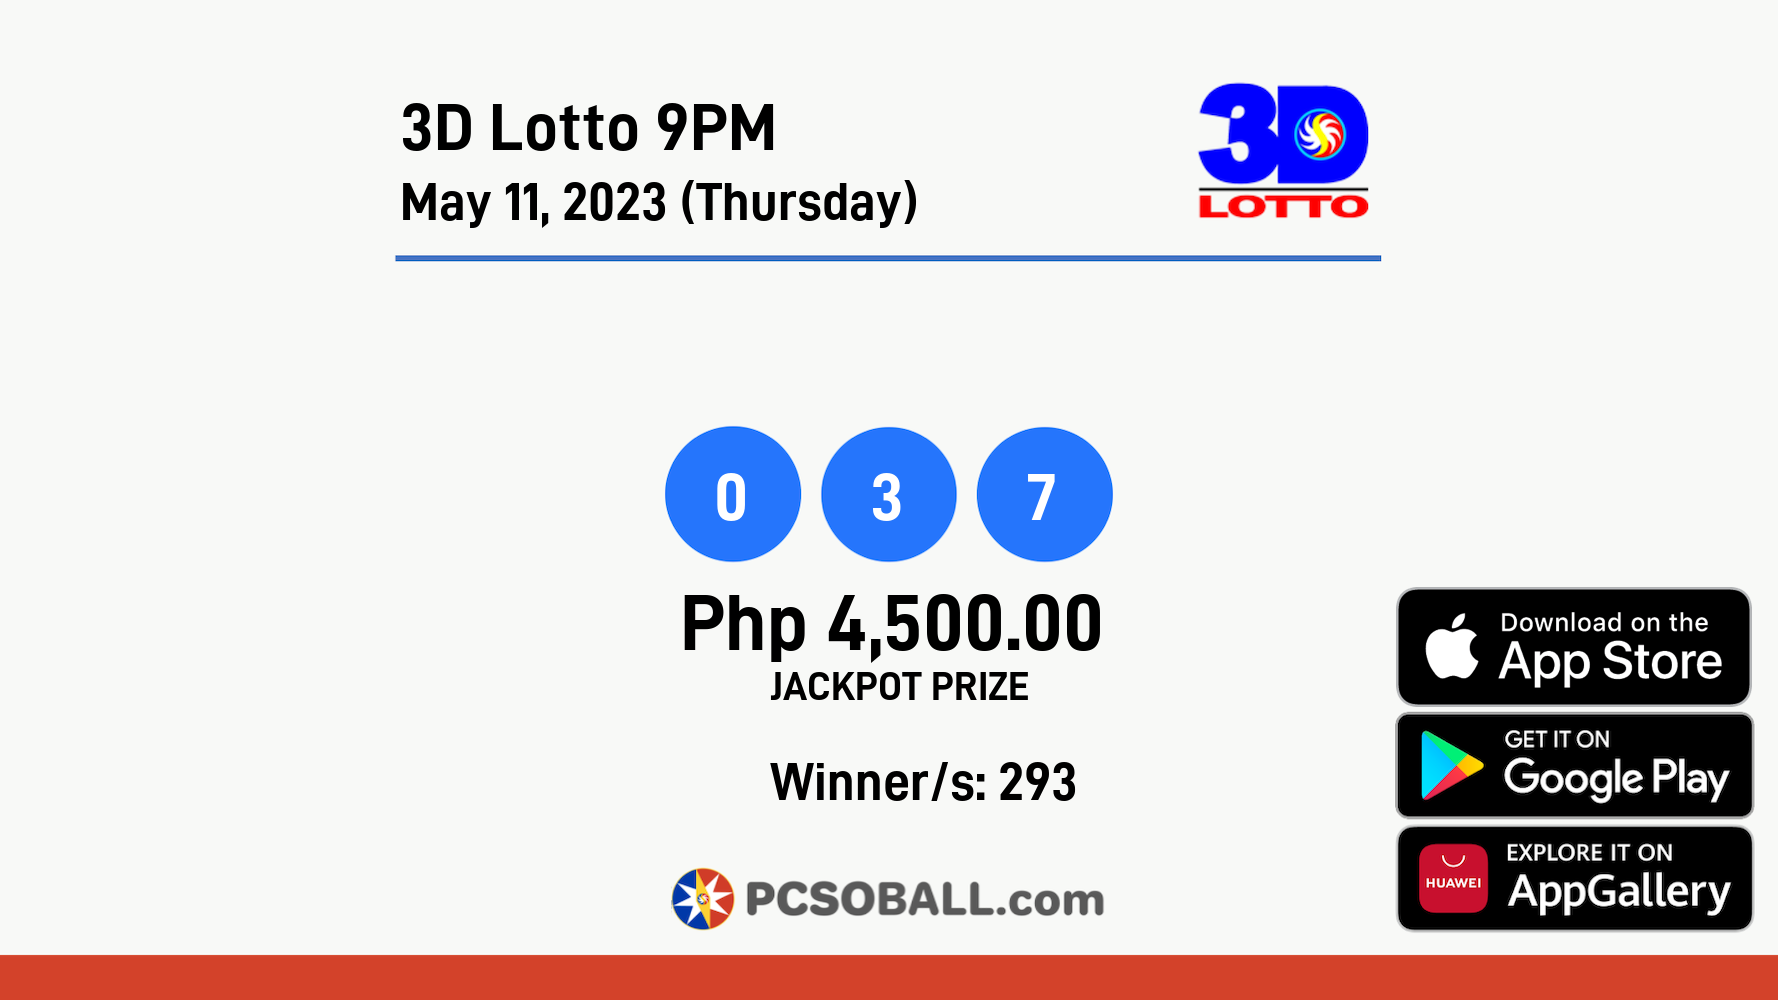 3D Lotto 9PM May 11, 2023 (Thursday) Result